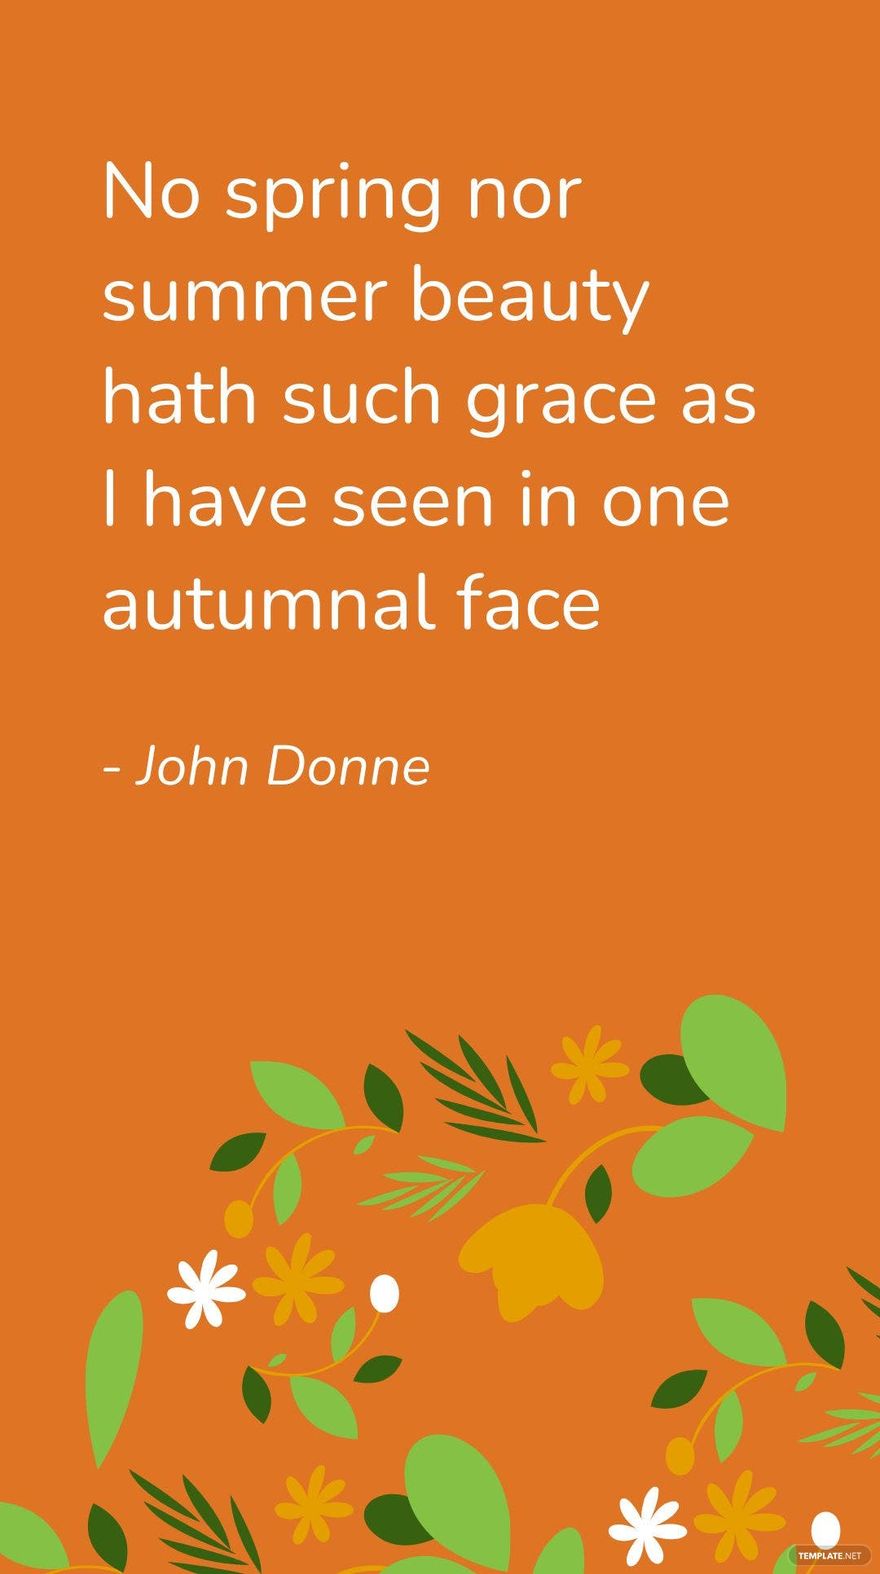 John Donne - No spring nor summer beauty hath such grace as I have seen in one autumnal face in JPG